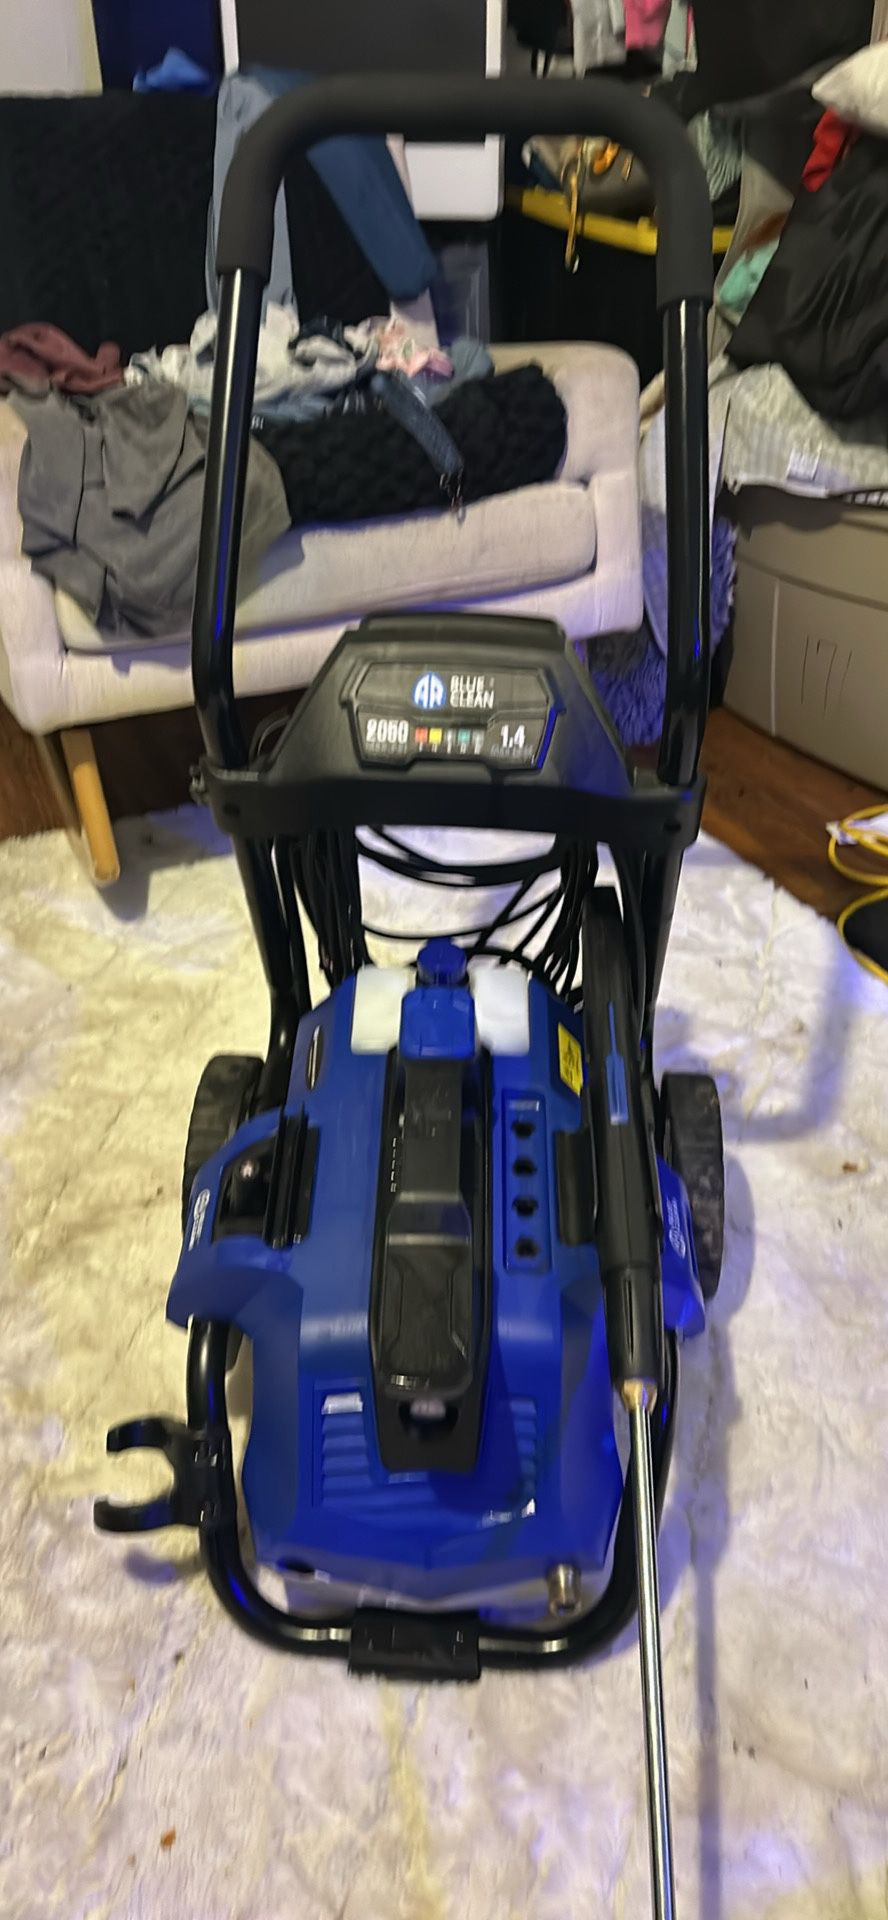 Blue Clean electric power washer